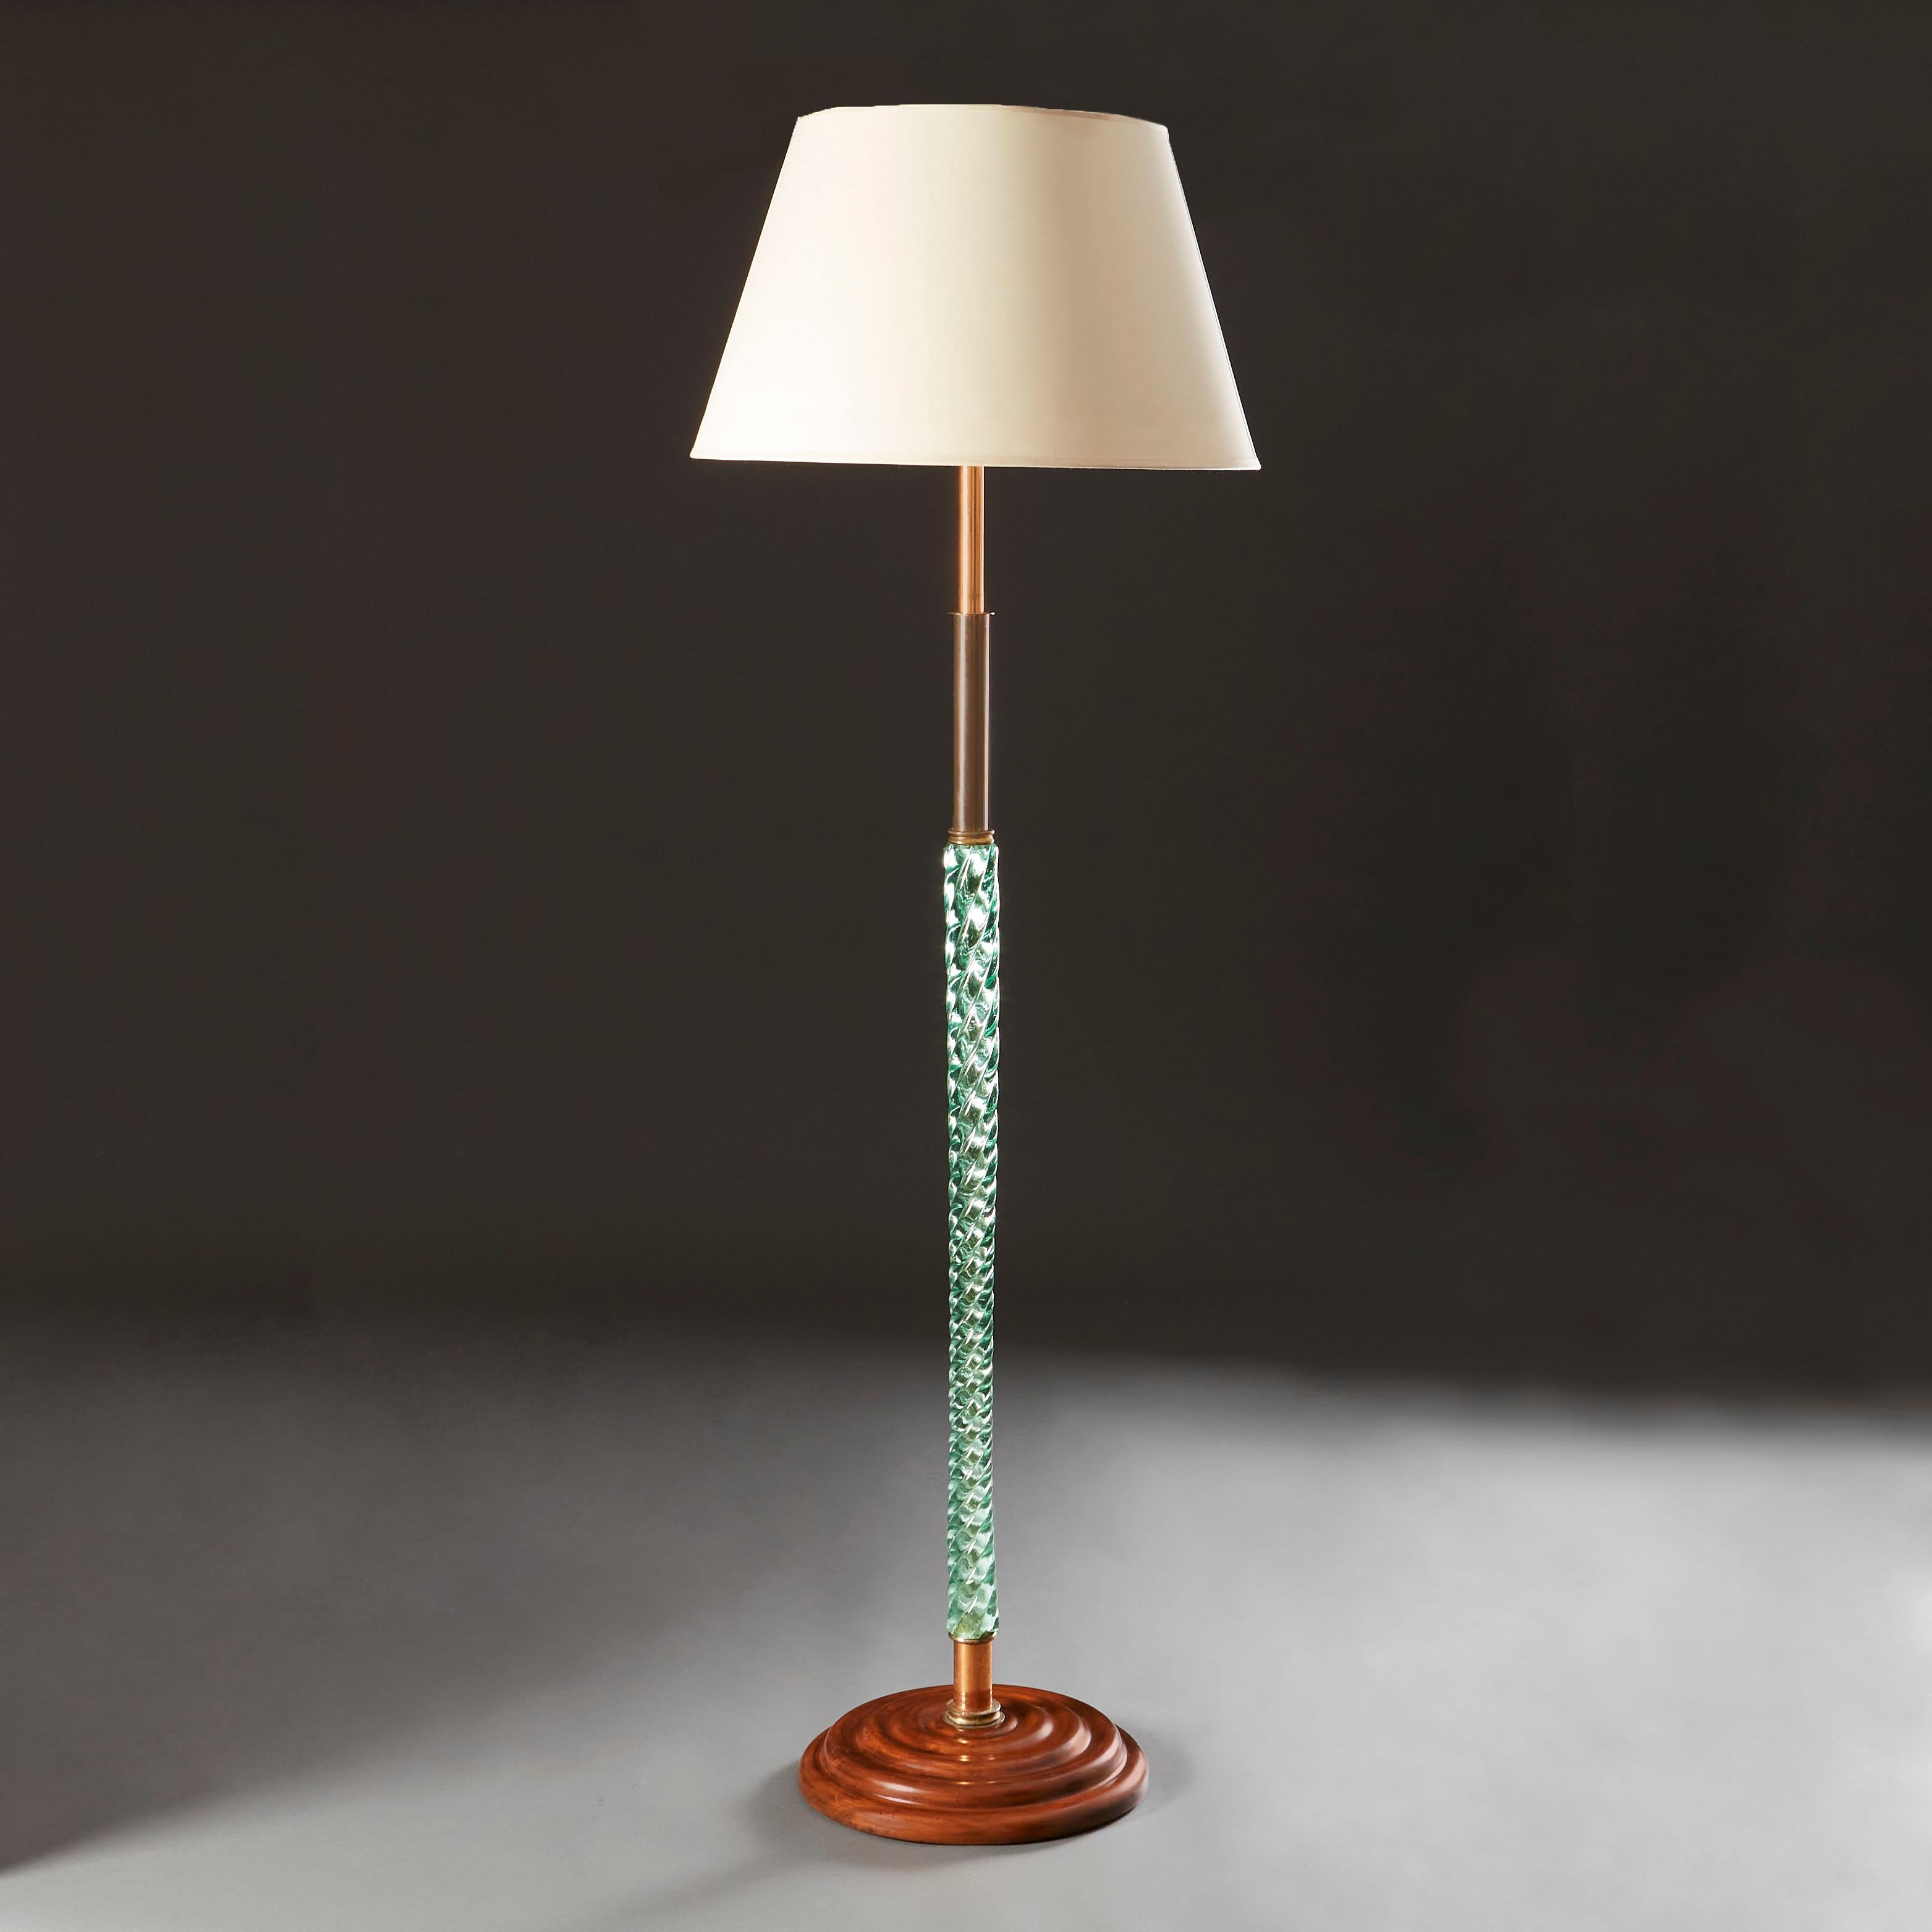 An unusual early twentieth century standard lamp, the stem made up of green-tinted twisted glass, topped with copper metalwork, all supported on a stepped, turned mahogany base. After Venini.

Currently wired for the UK.

Please note: Lampshade